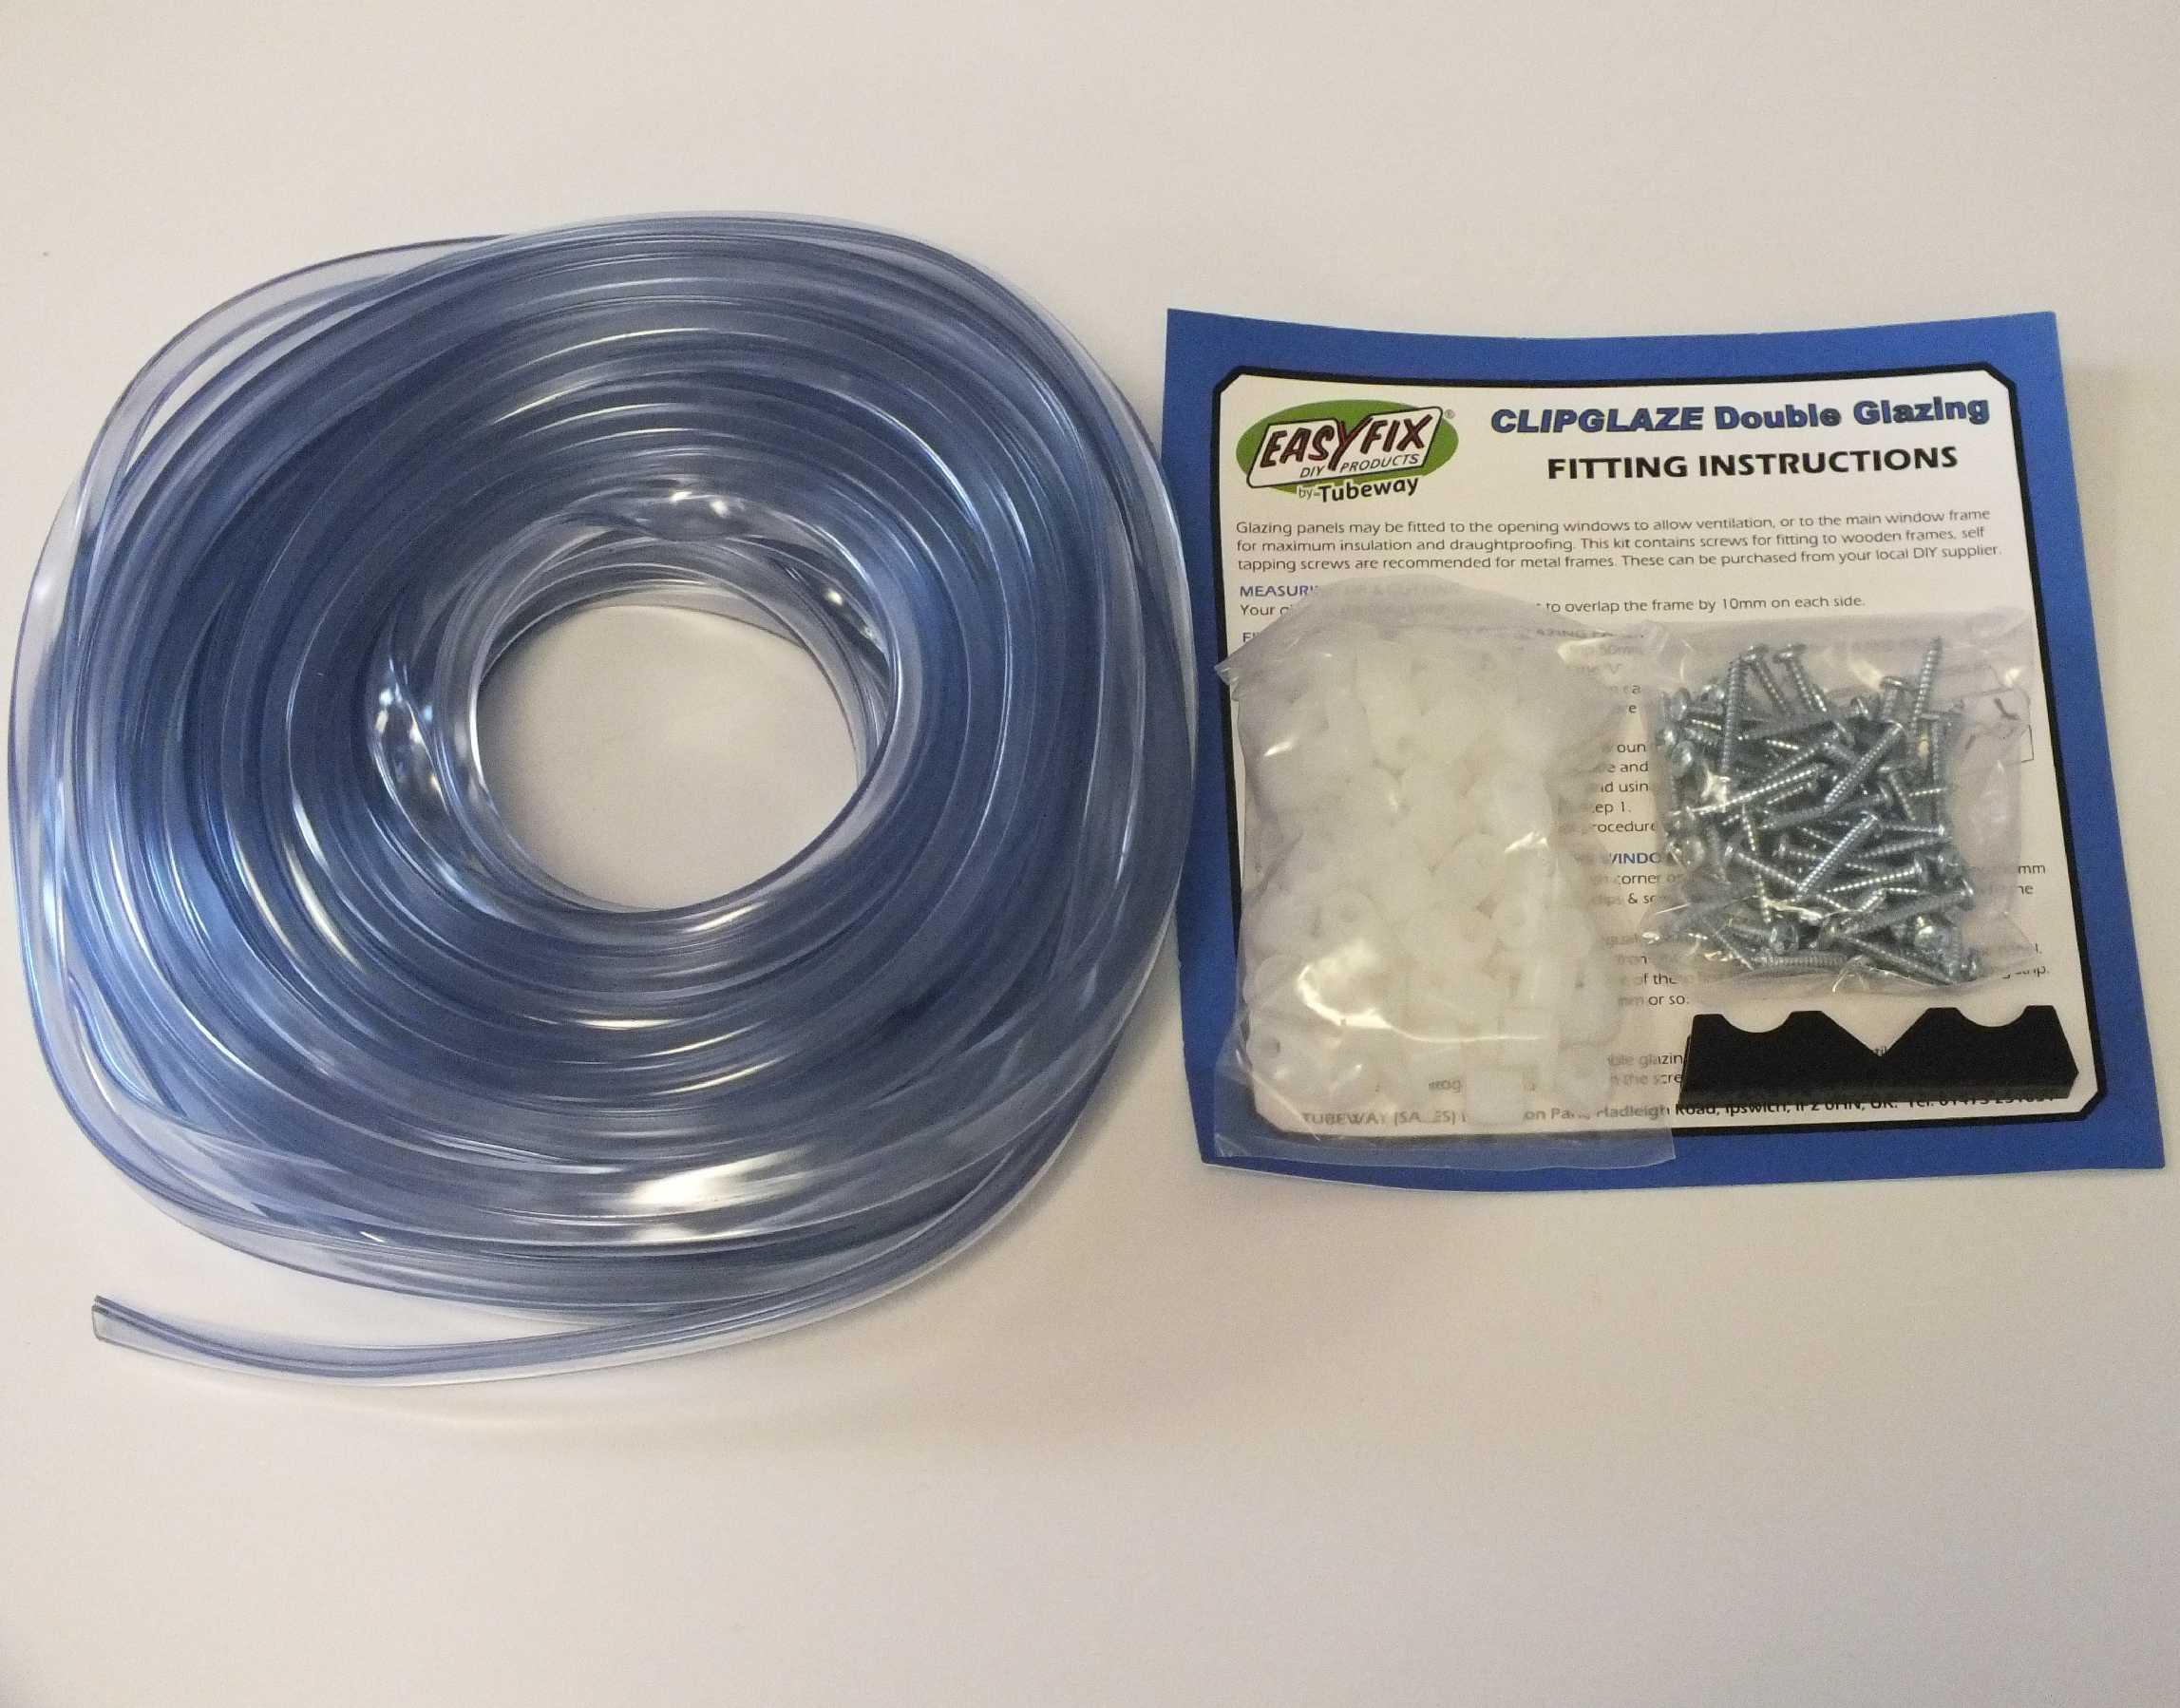 Buy Easyfix Clipglaze Edging Kit - 15m roll of edging for 6mm Glazing Thickness, White online today